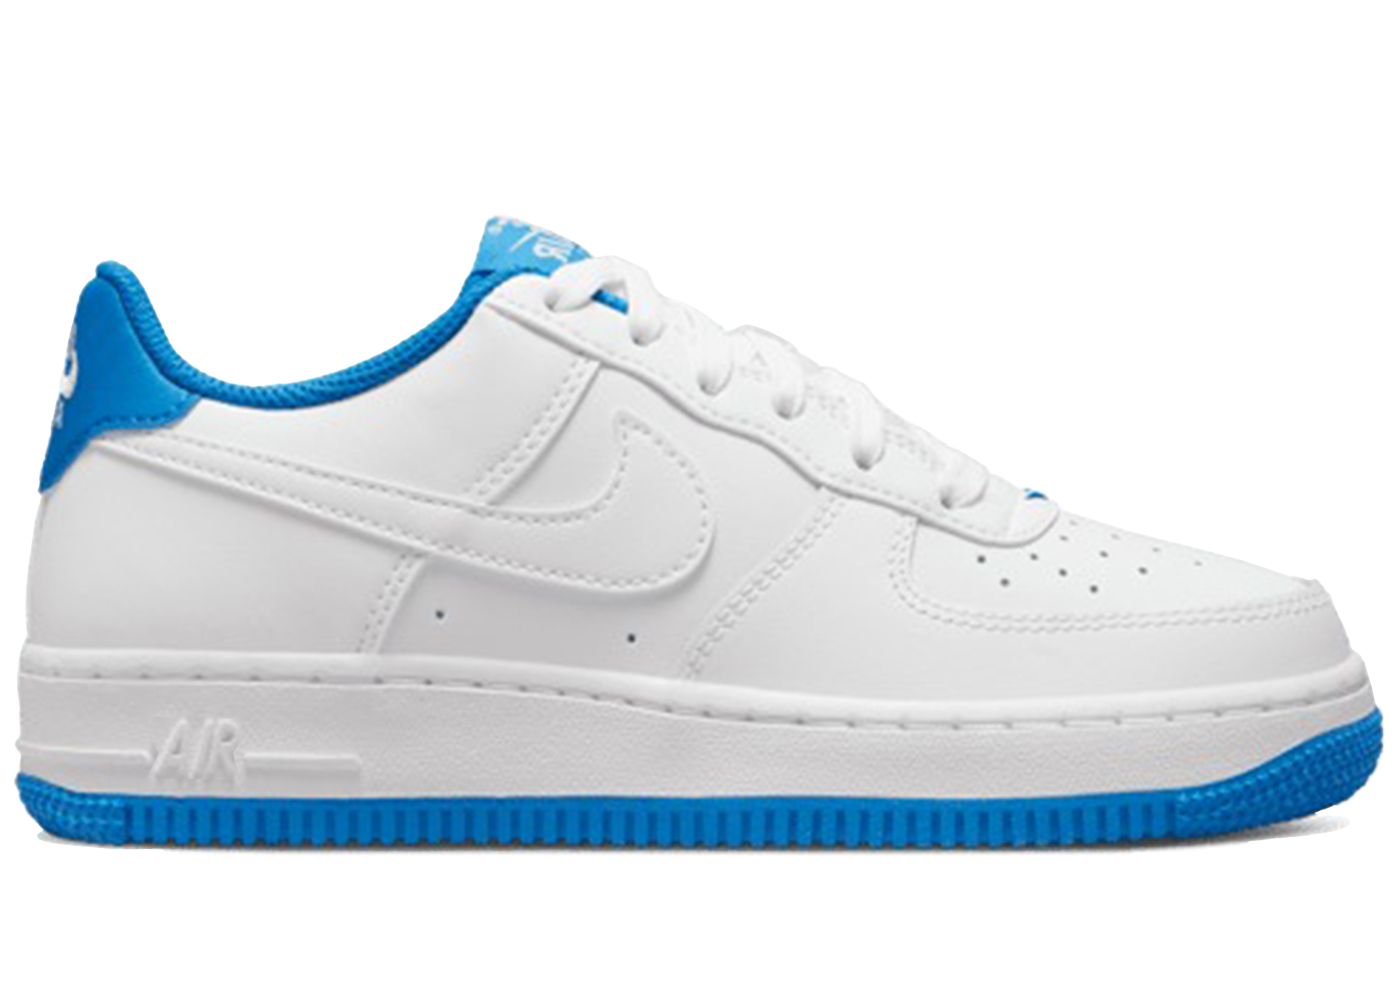 Nike Air Force 1 Low '07 White Light Photo Blue (GS)